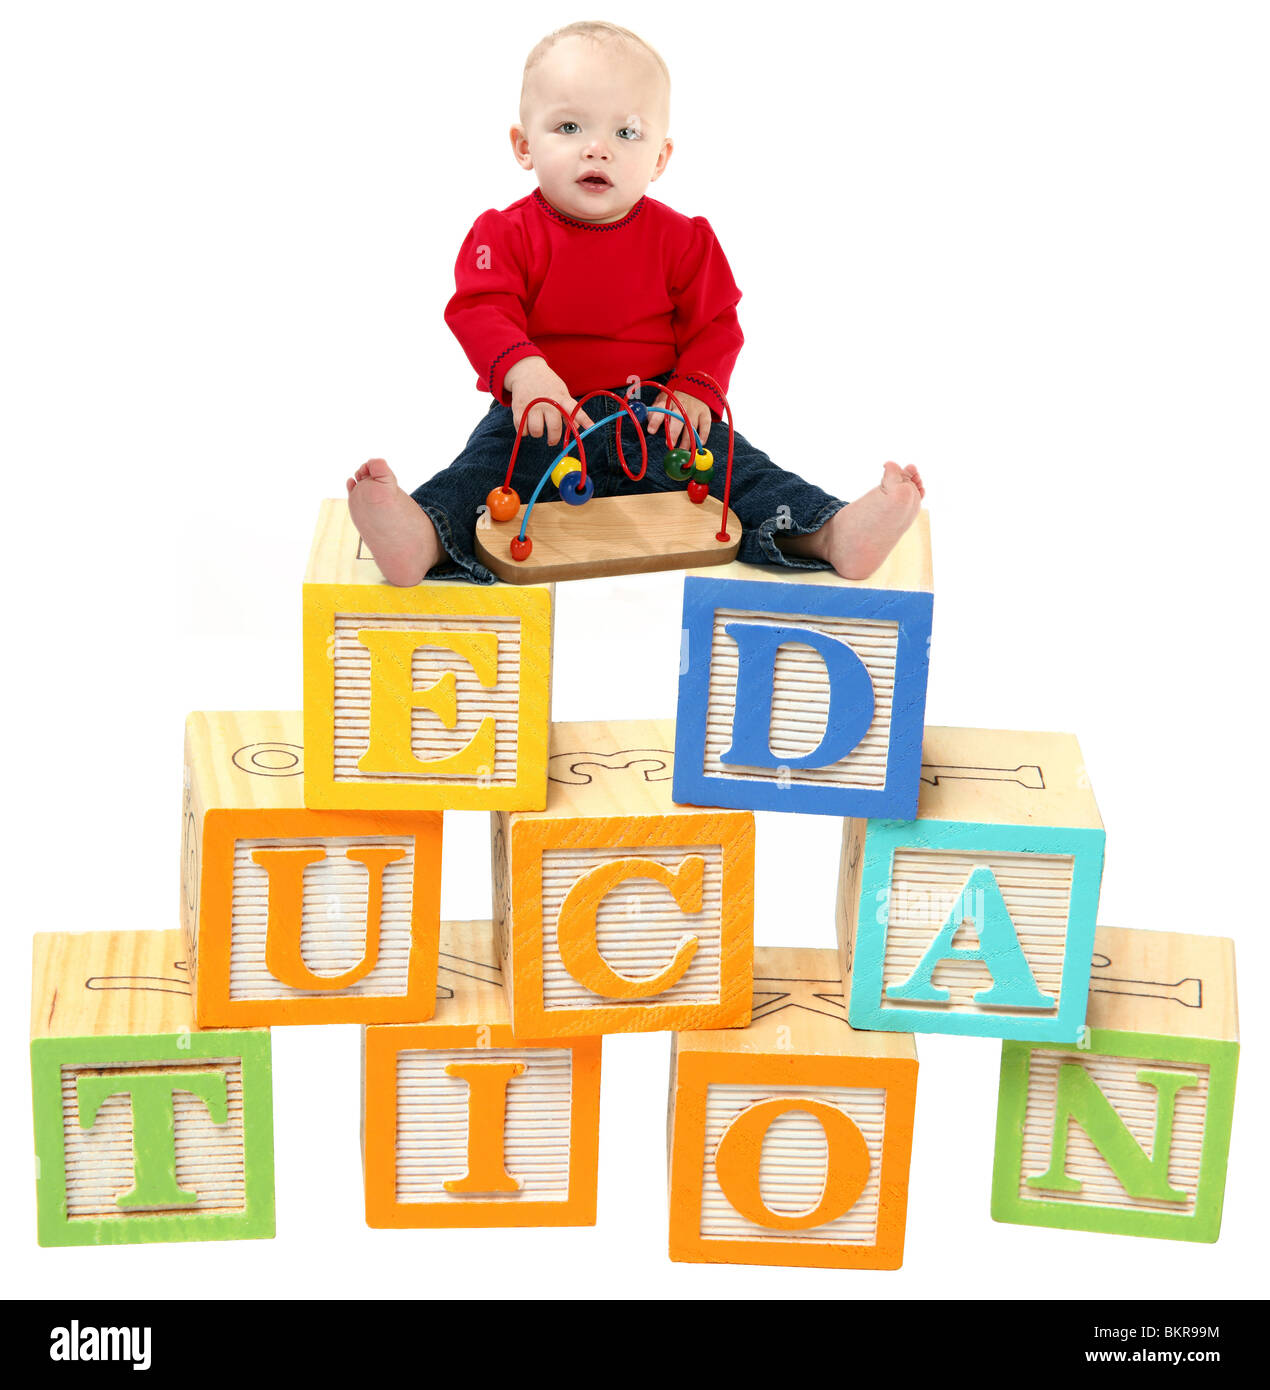 14 mois baby girl sitting on colorful toy blocks que lire l'éducation. Banque D'Images